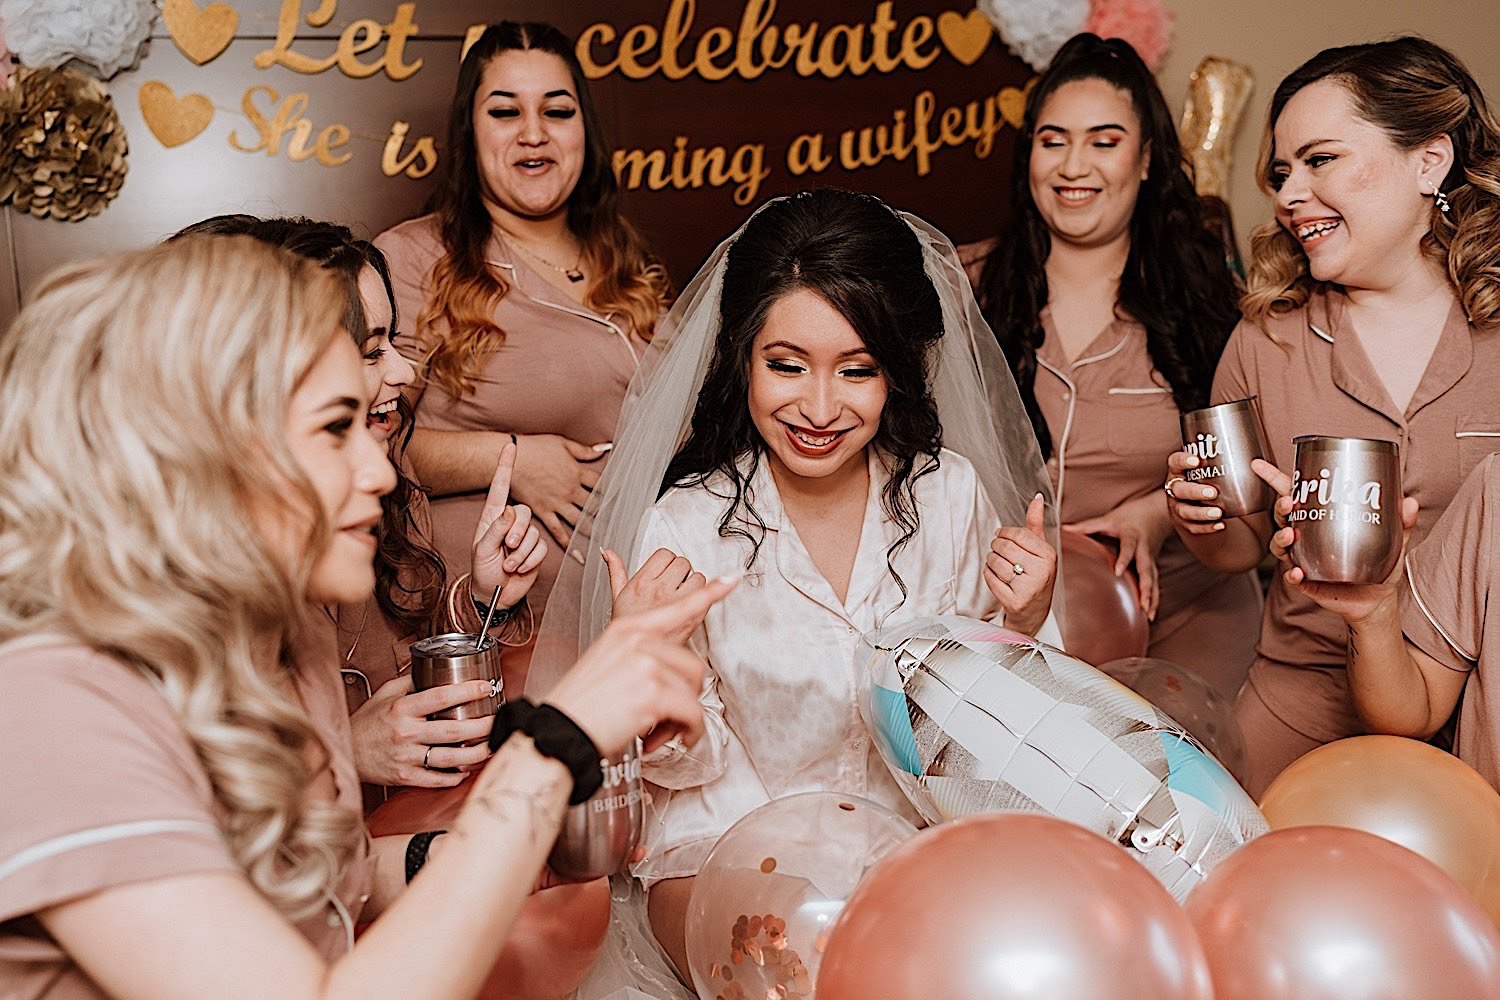 Bride shares drinks in bed with bridesmaids before wedding